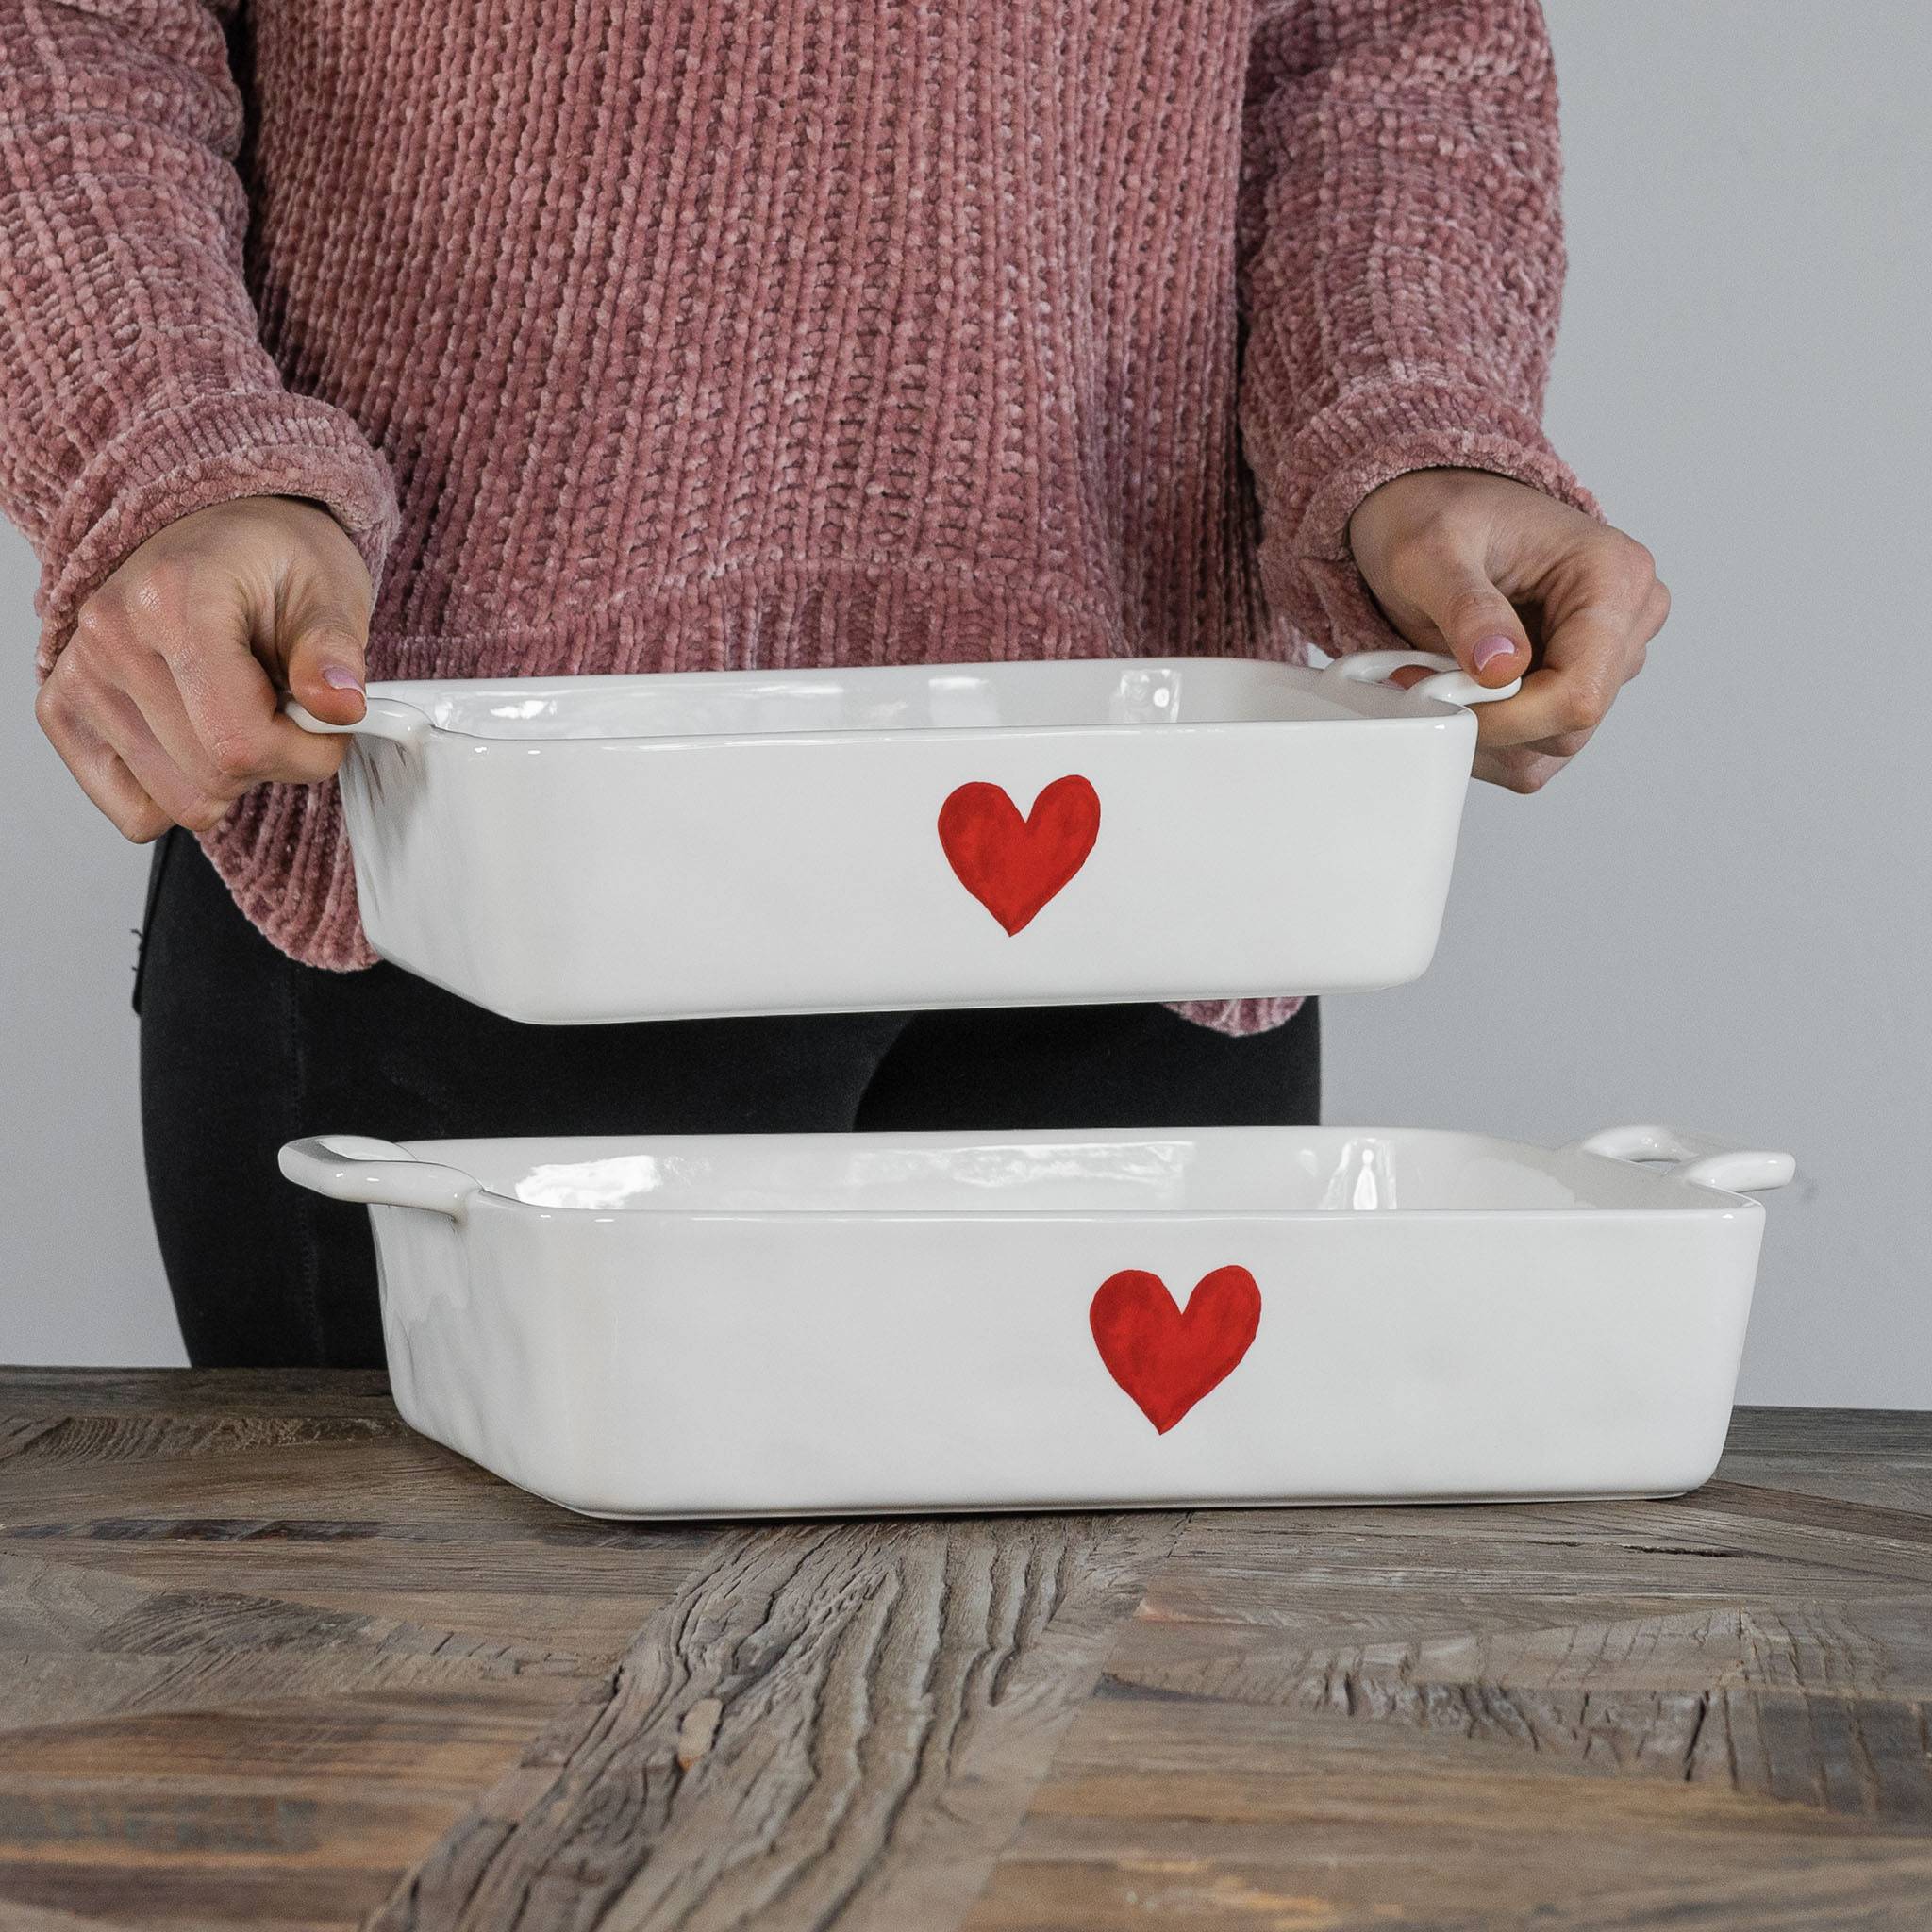 Red Heart Oven Dish